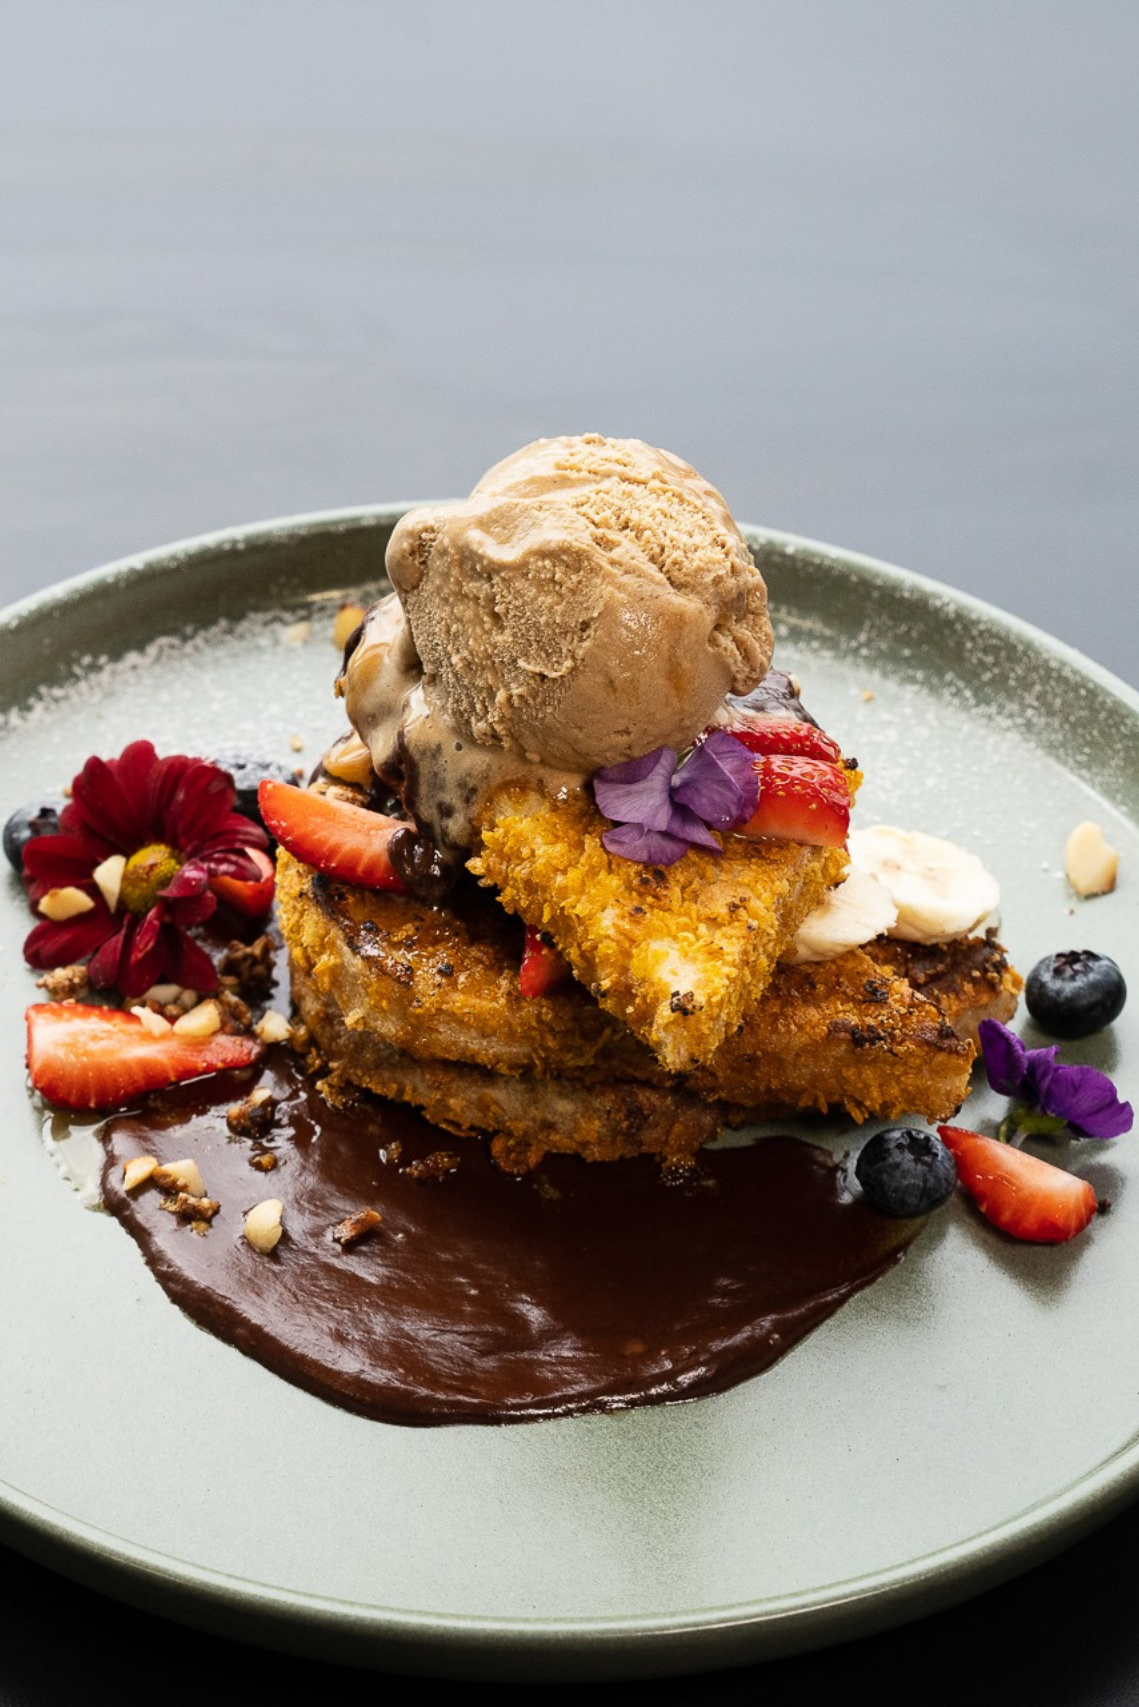 Crispy french toast with salted caramel gelato